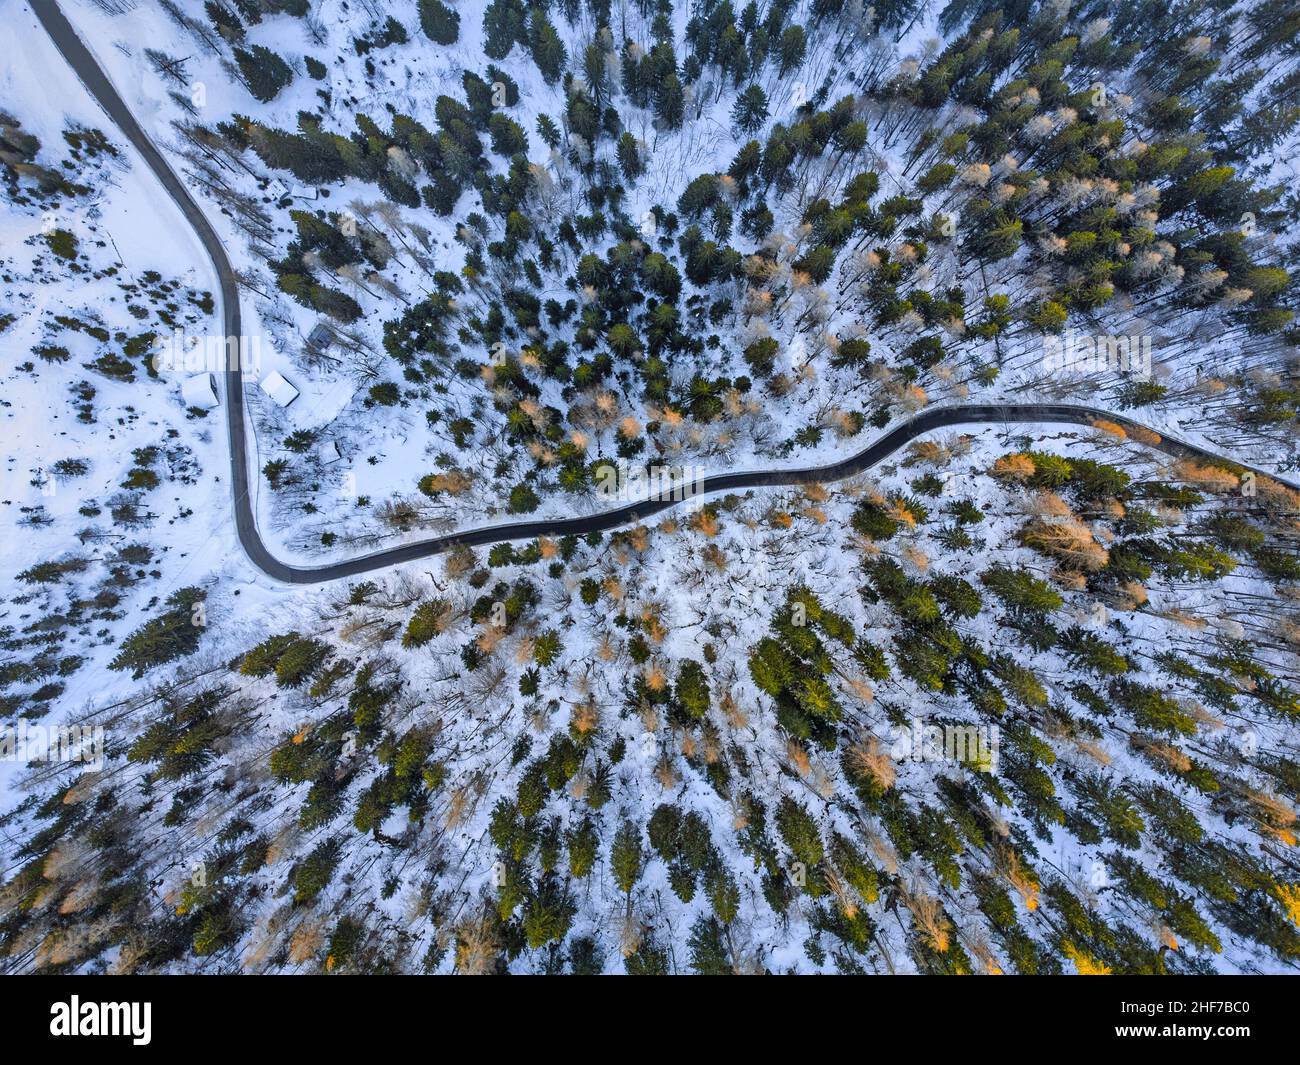 Italy,  province of Belluno,  Val di Zoldo,  Dolomites,  elevated view of an alpine road surrounded by trees,  Passo Duran Stock Photo